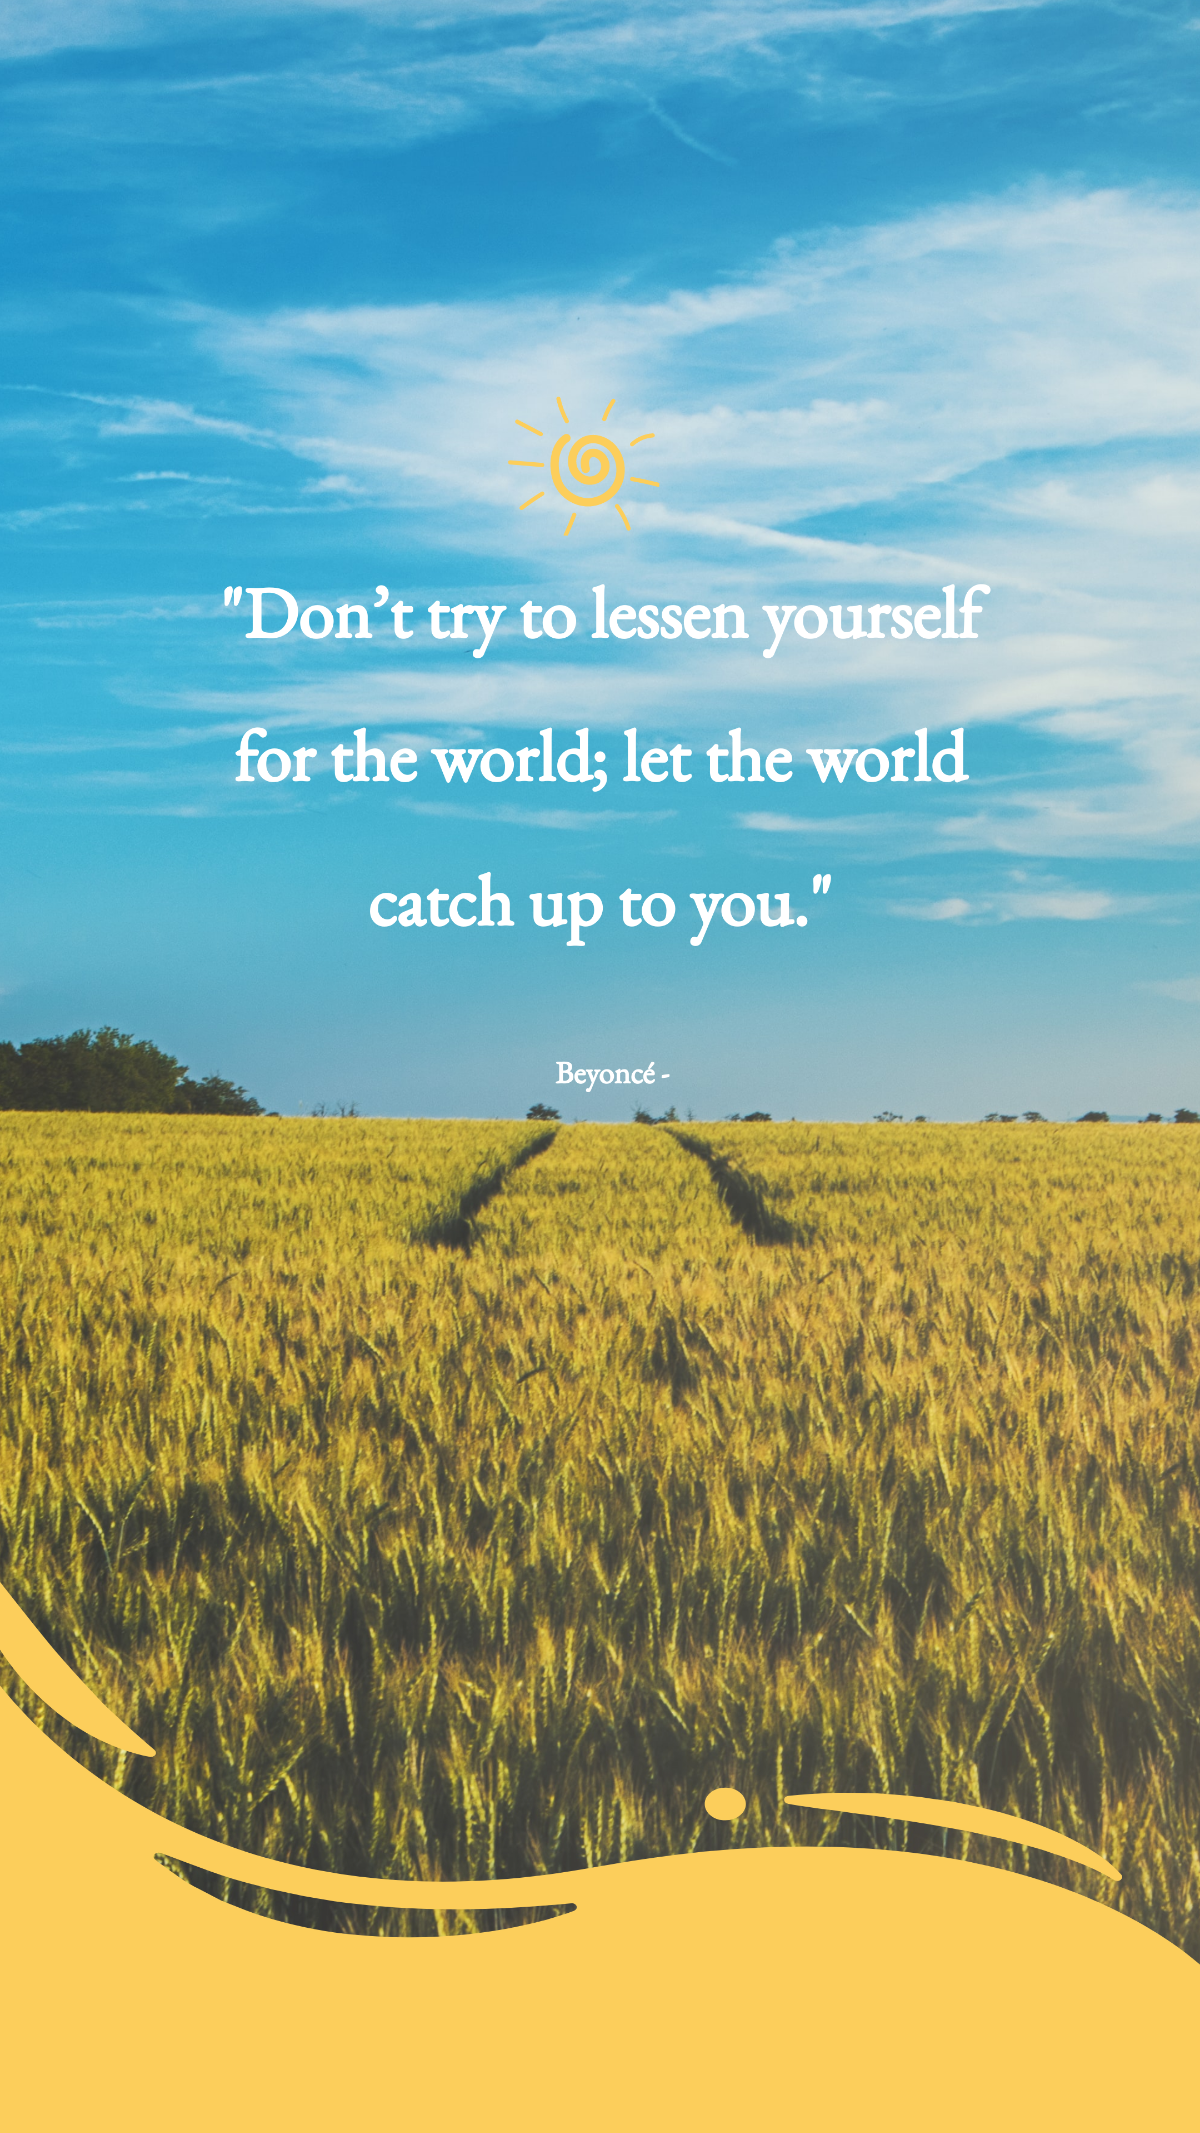 Beyoncé - Don’t try to lessen yourself for the world; let the world catch up to you. Template